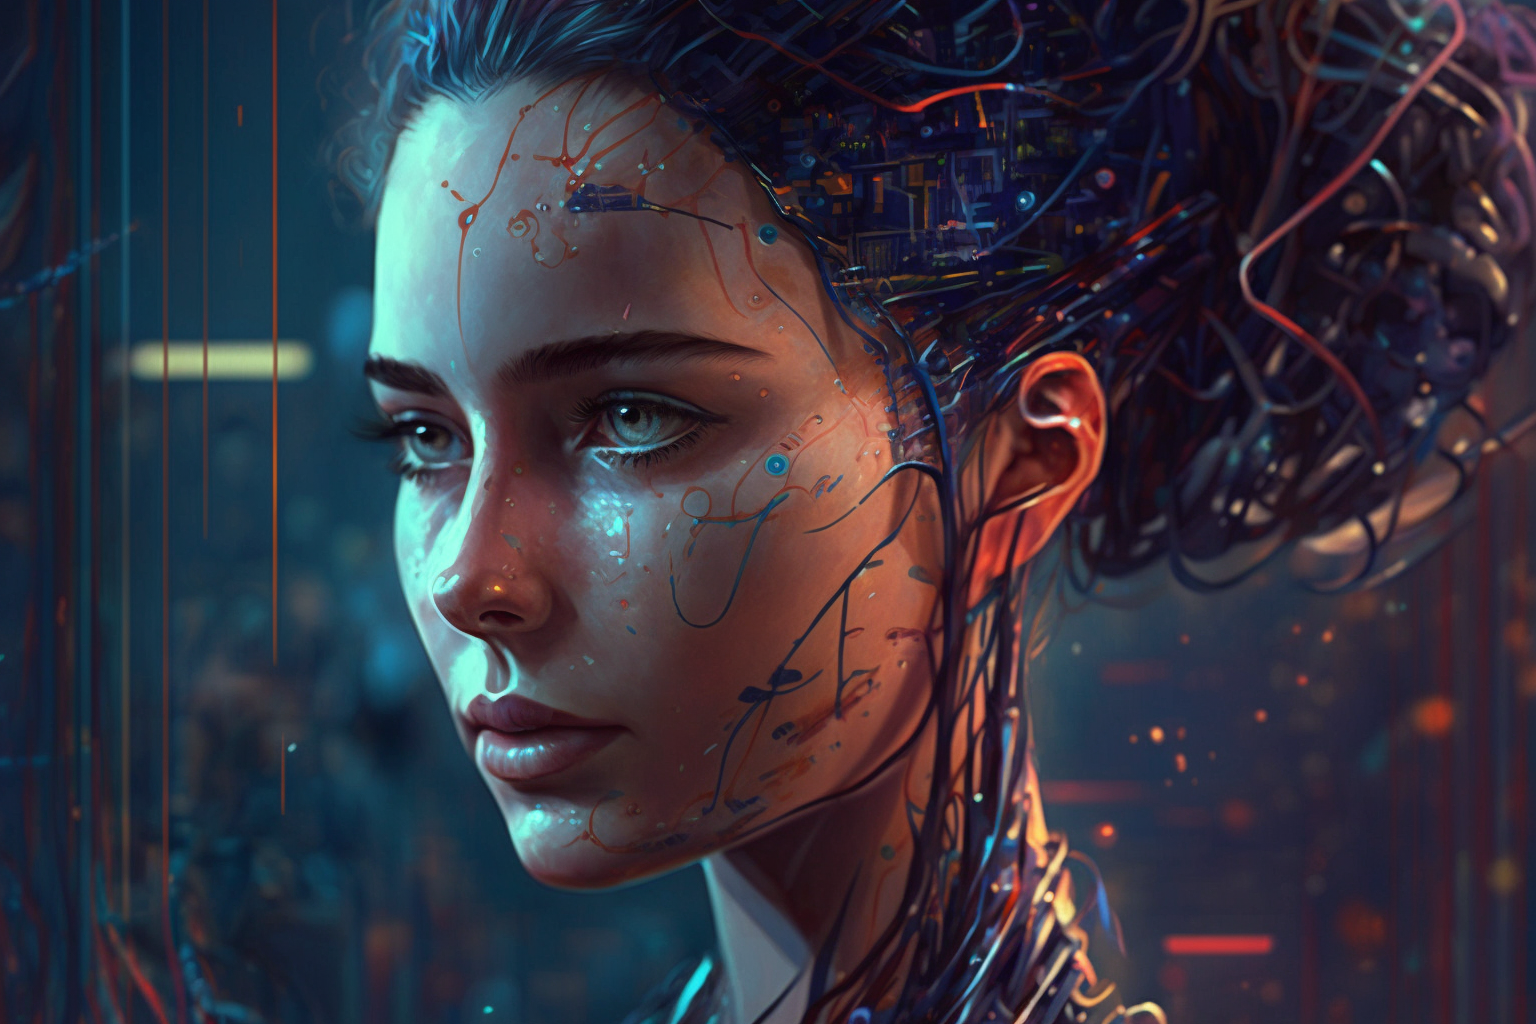 A young woman with colorful circuitry for air looks pensive